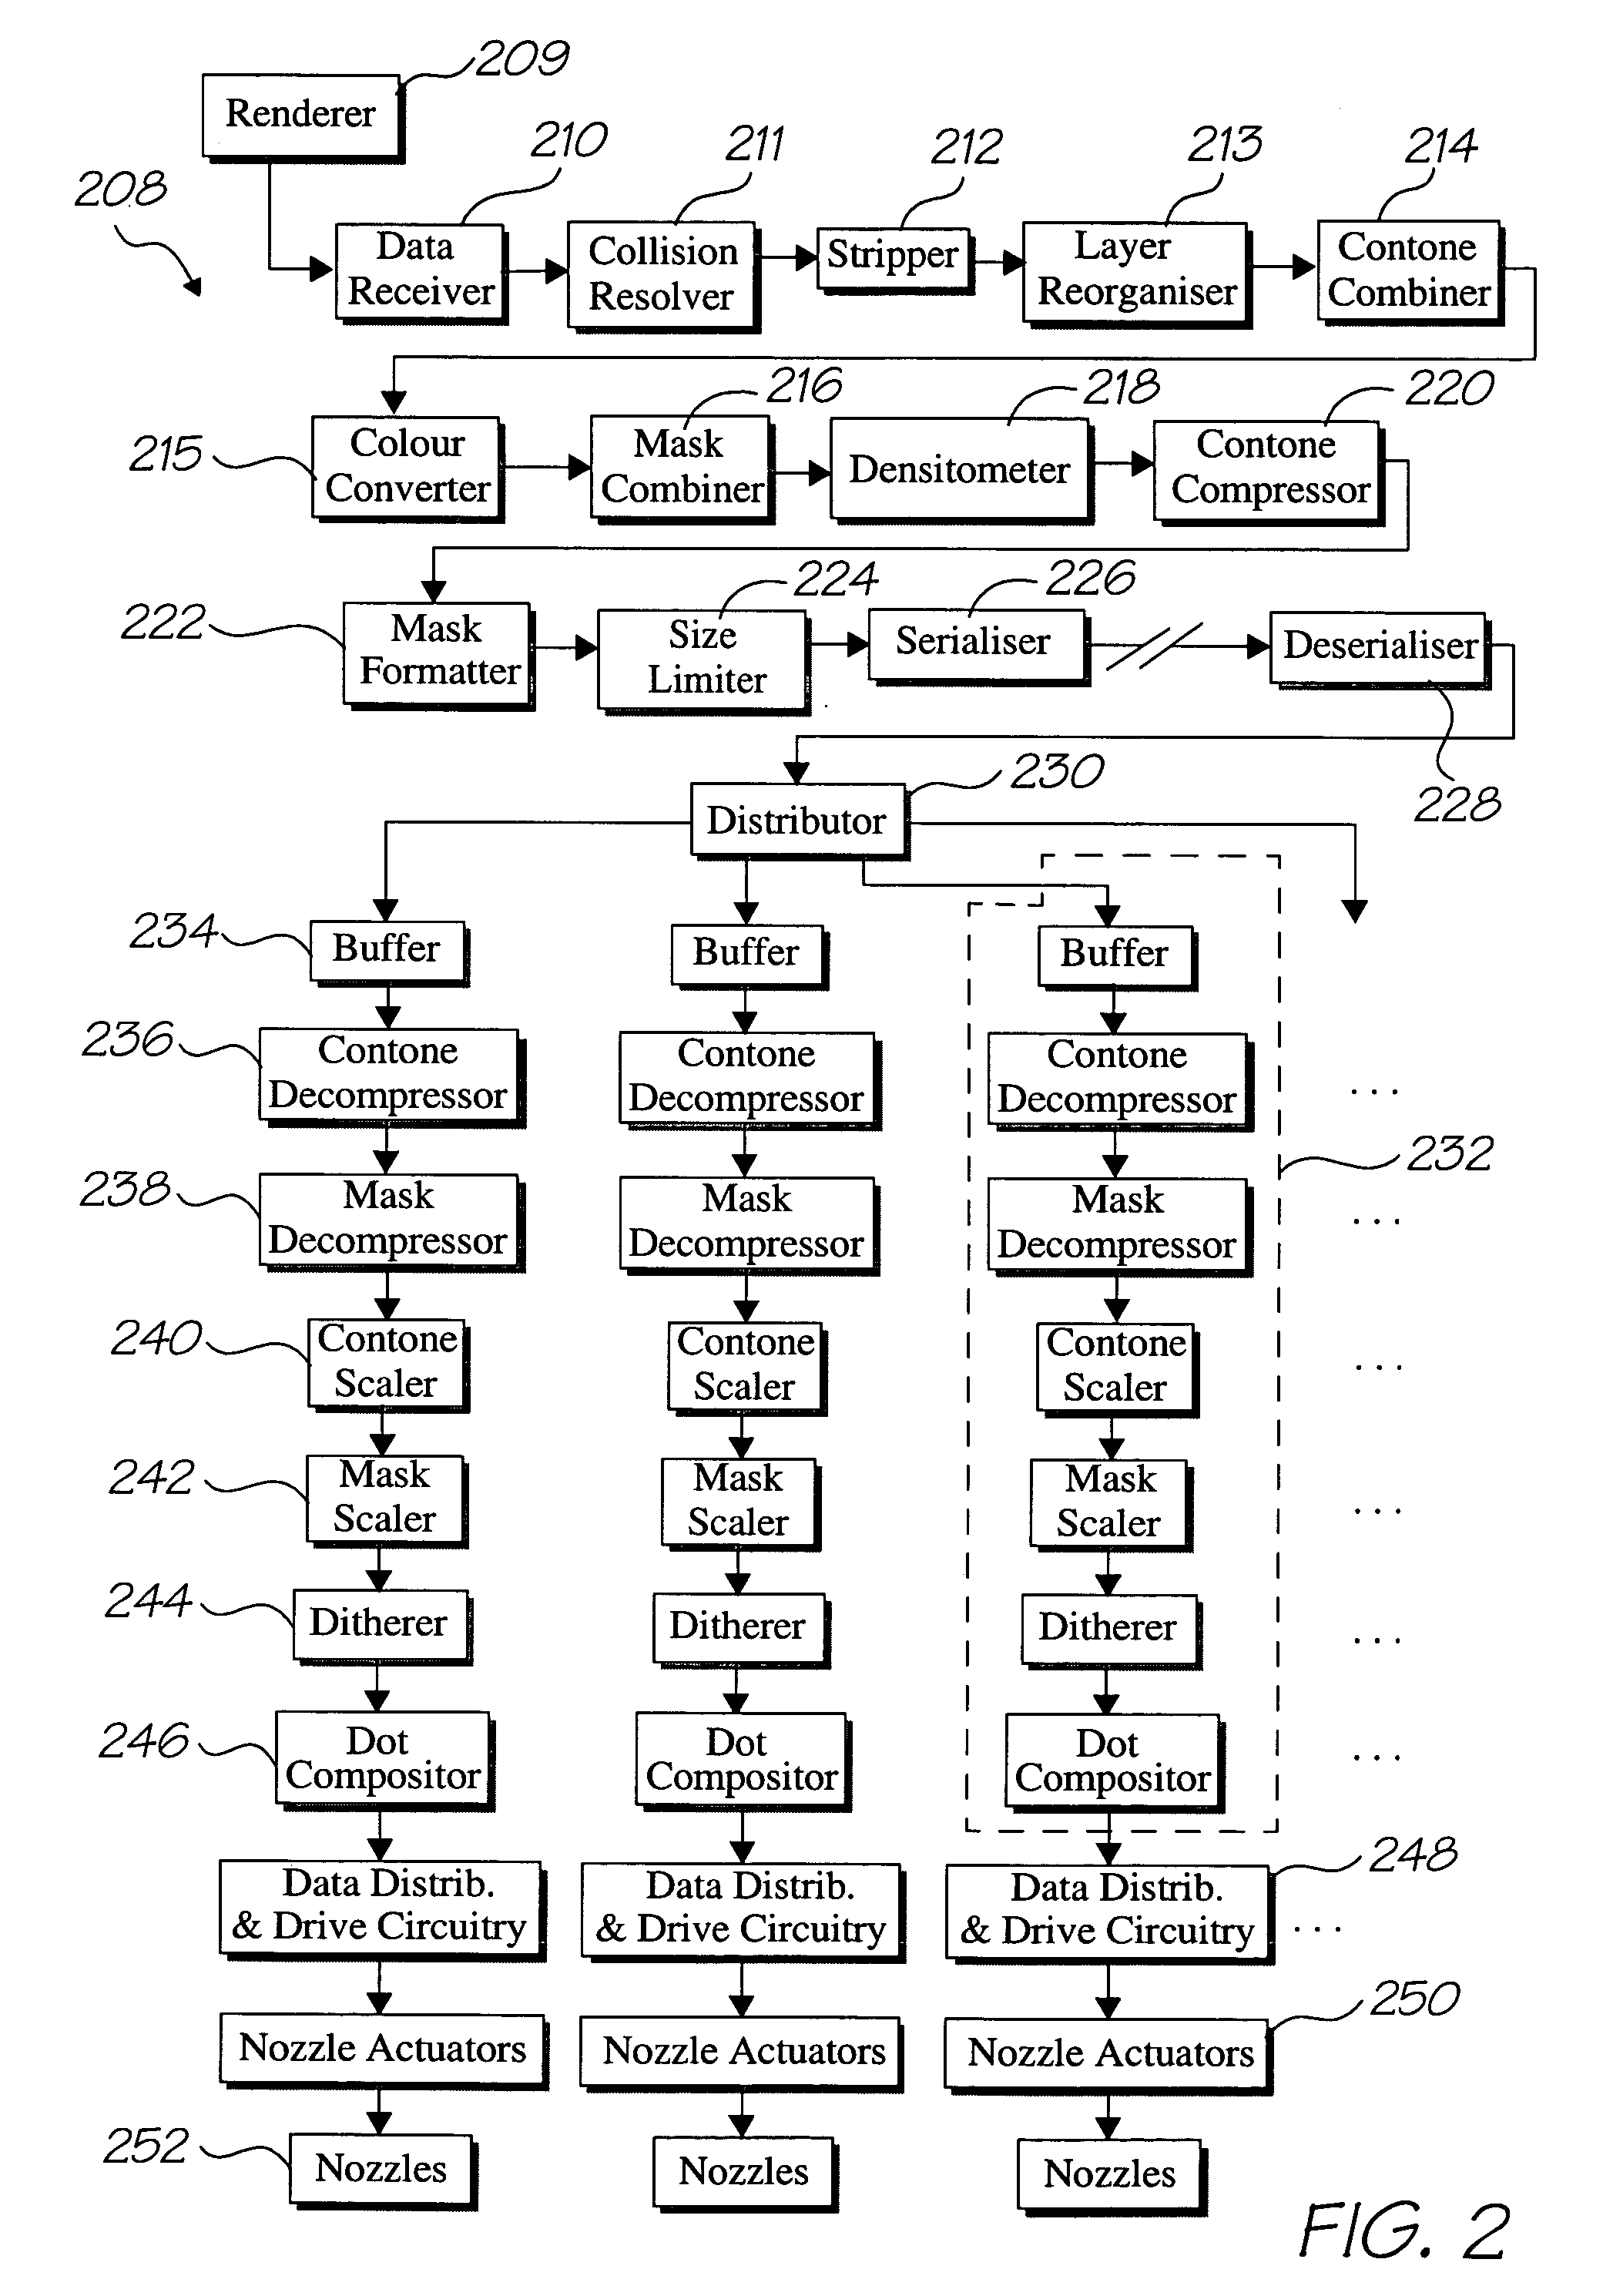 Display device for use as a computer monitor, having a printer controller and a pagewidth printhead